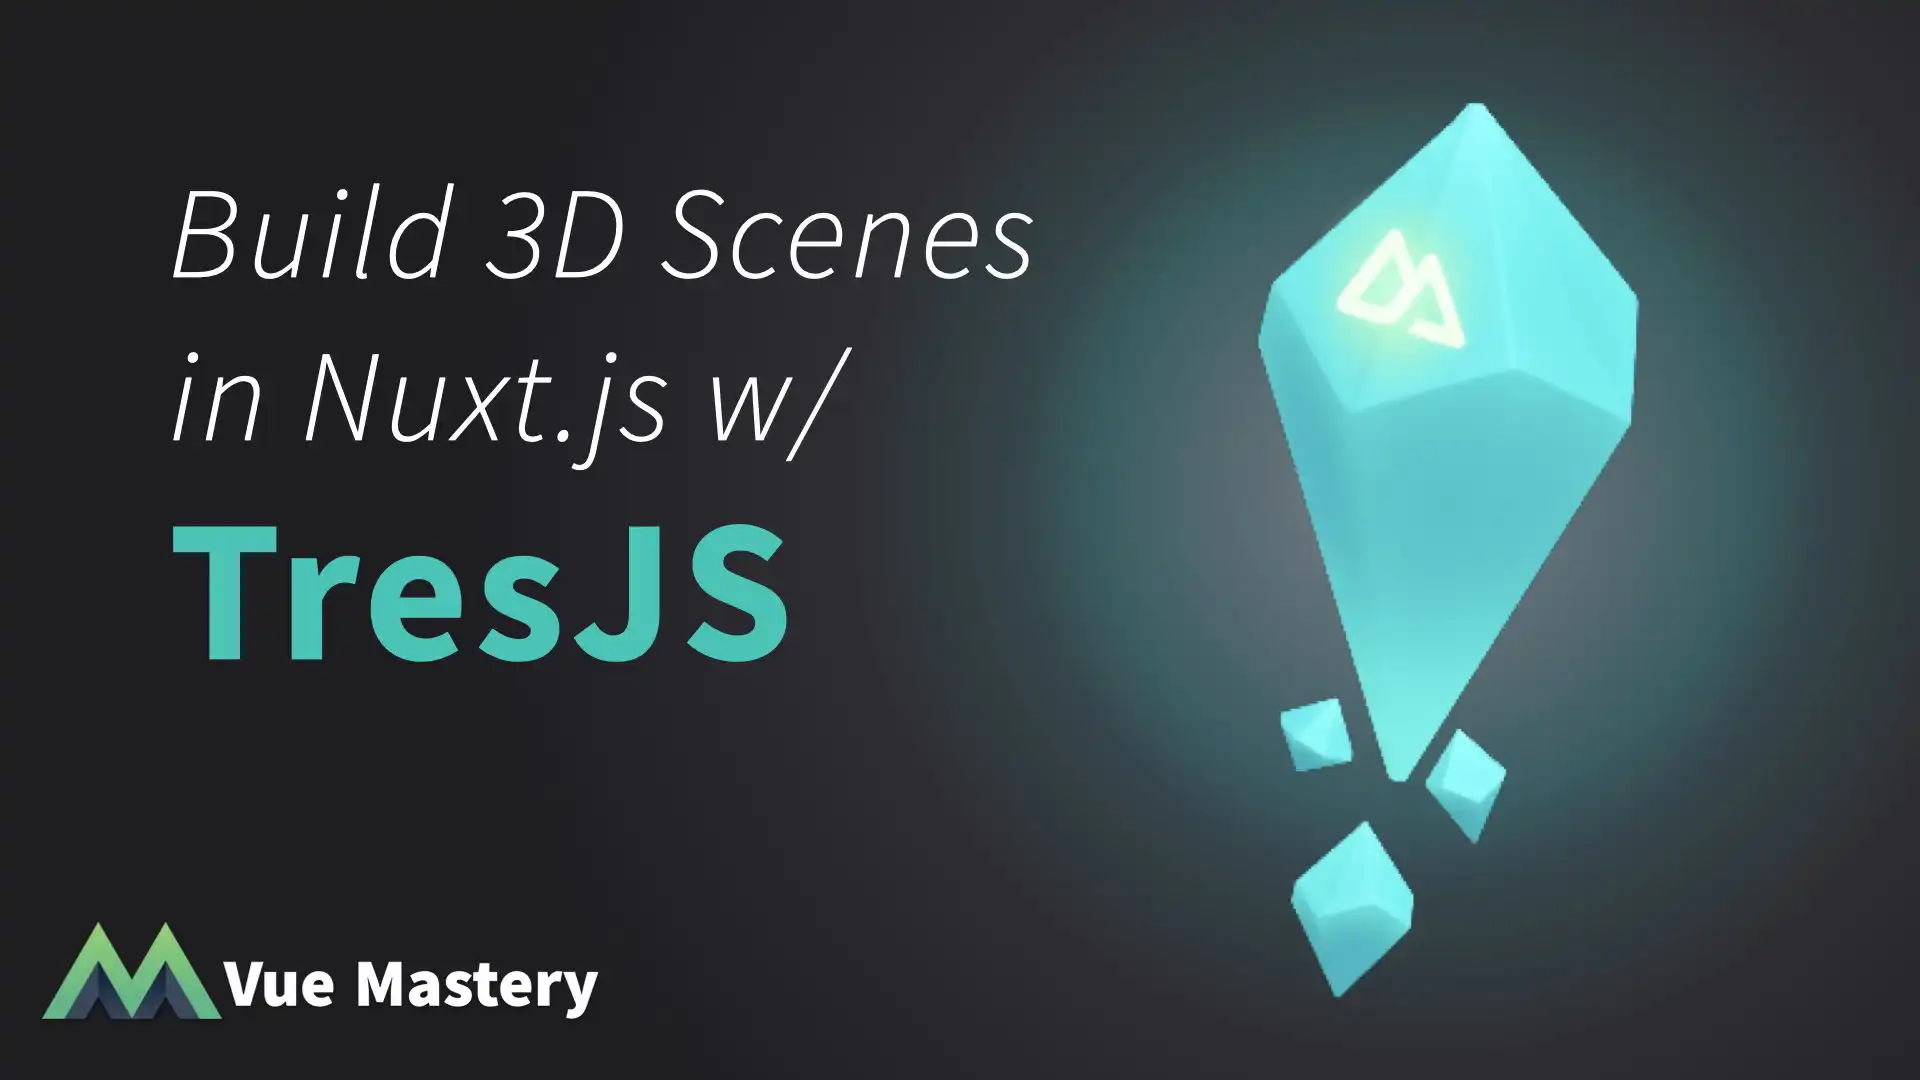 Building a 3D Scene in Nuxt with TresJS